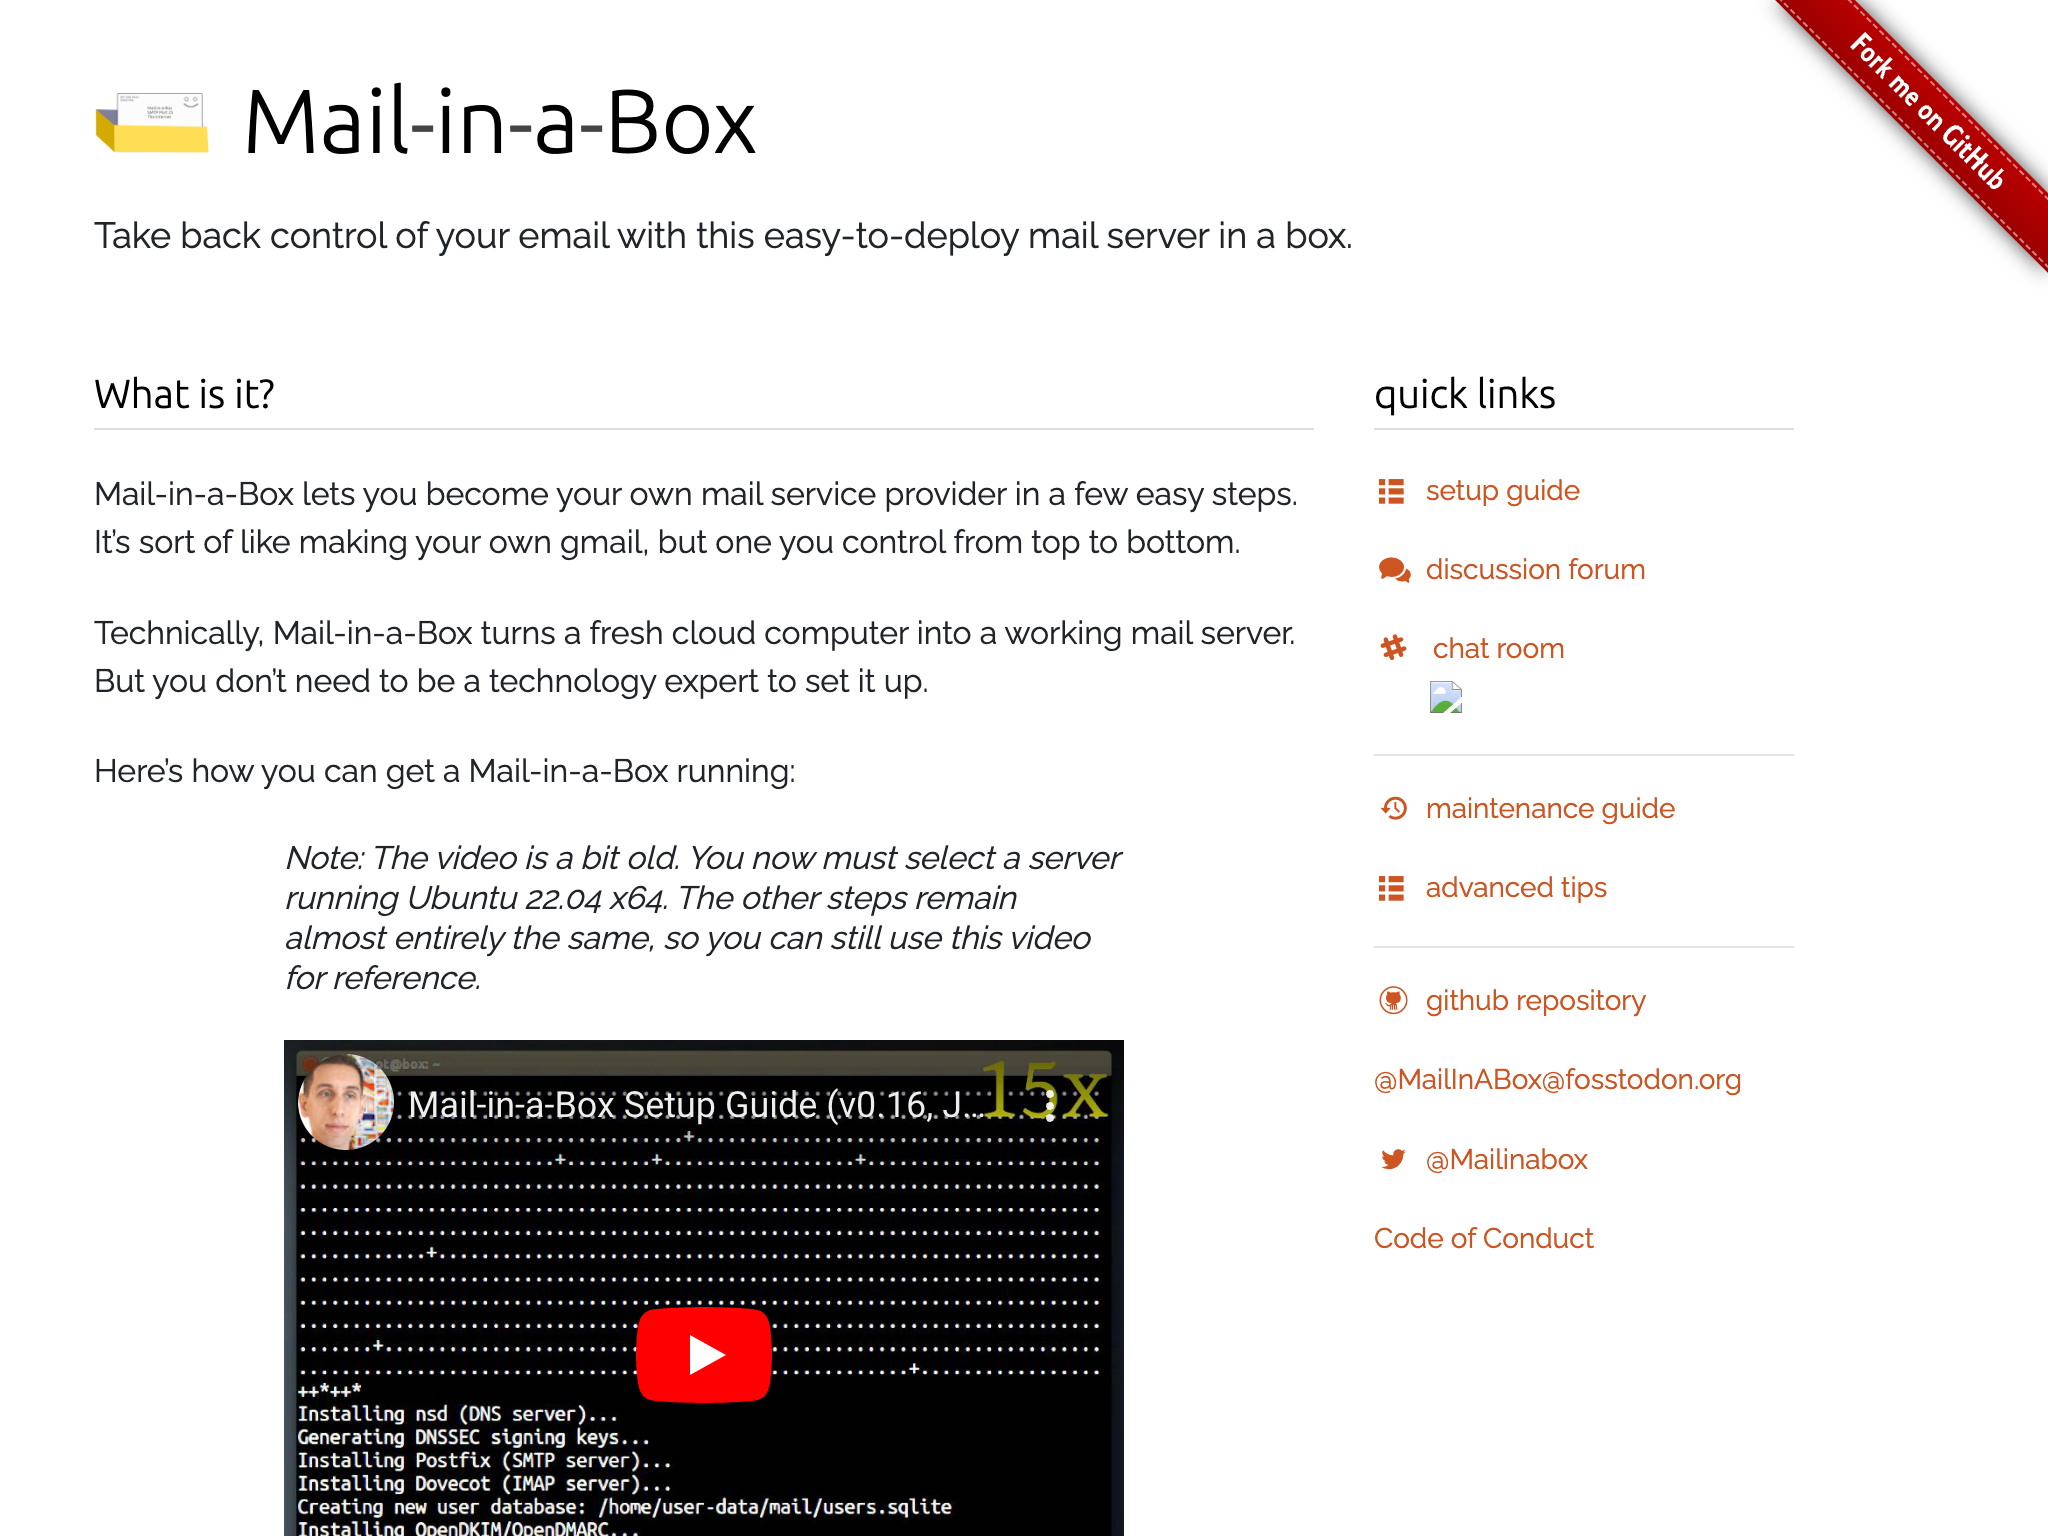 Mail-in-a-Box is an open-source email server for Android.